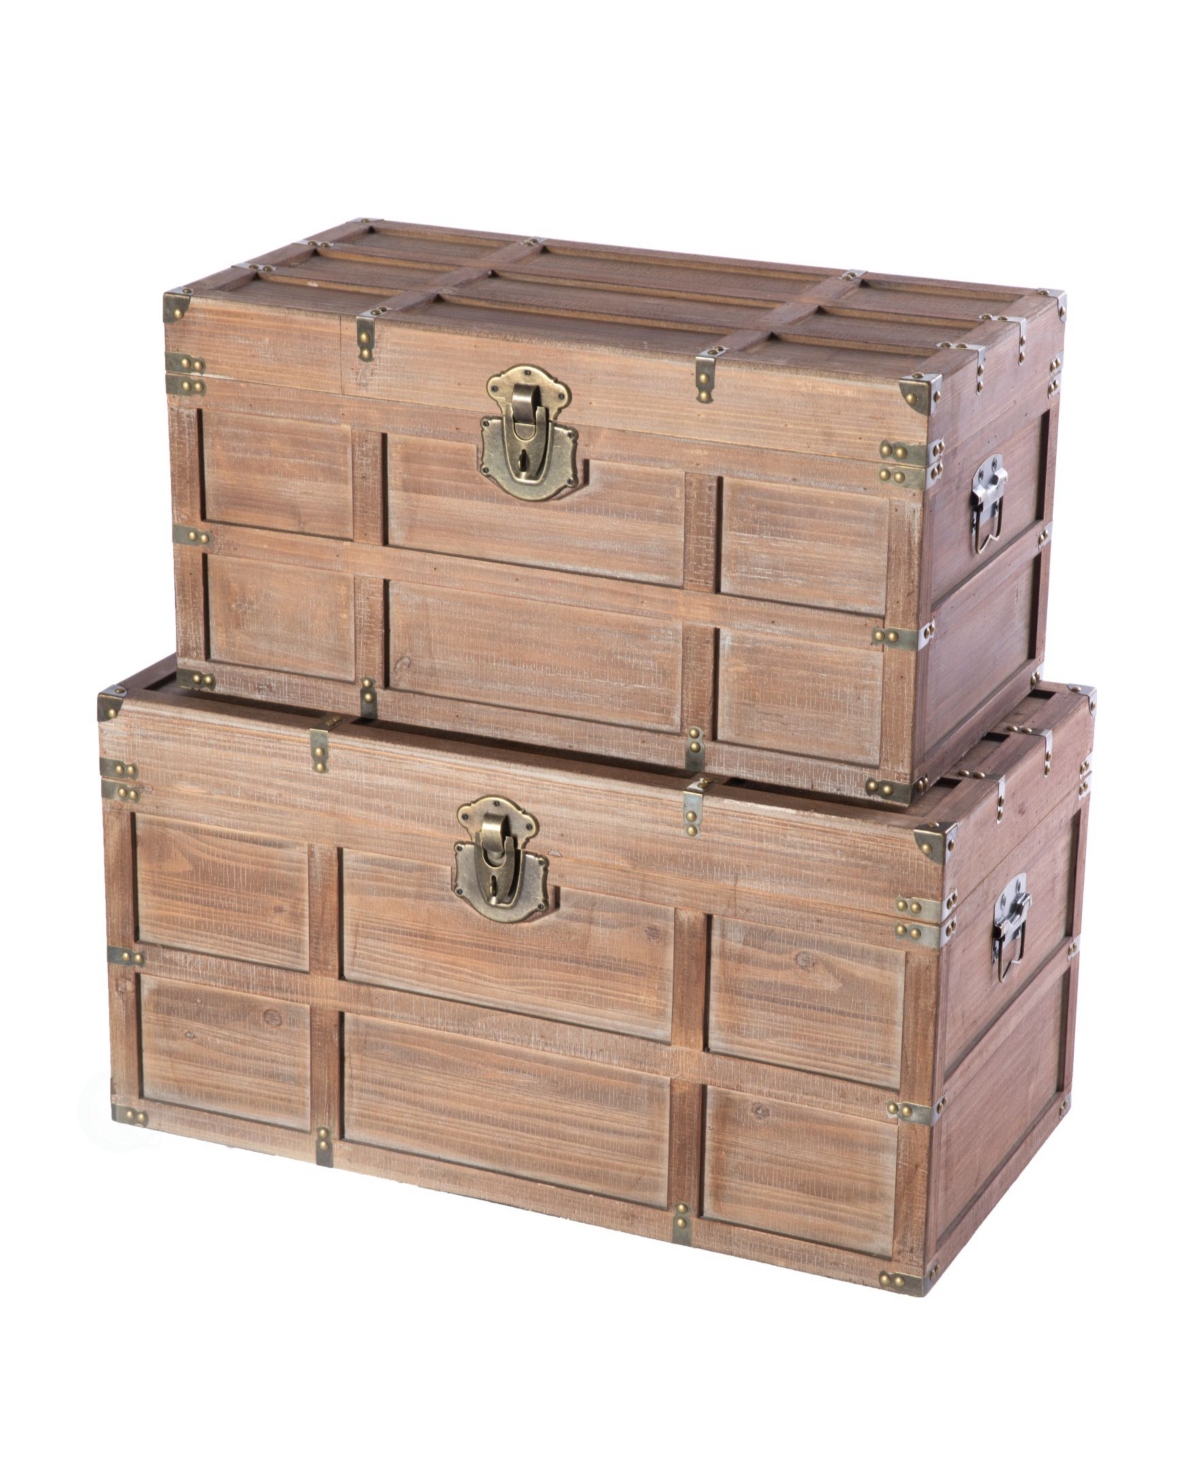 Wooden Rectangular Lined Rustic Storage Trunk with Latch, Set Of 2 - Brown